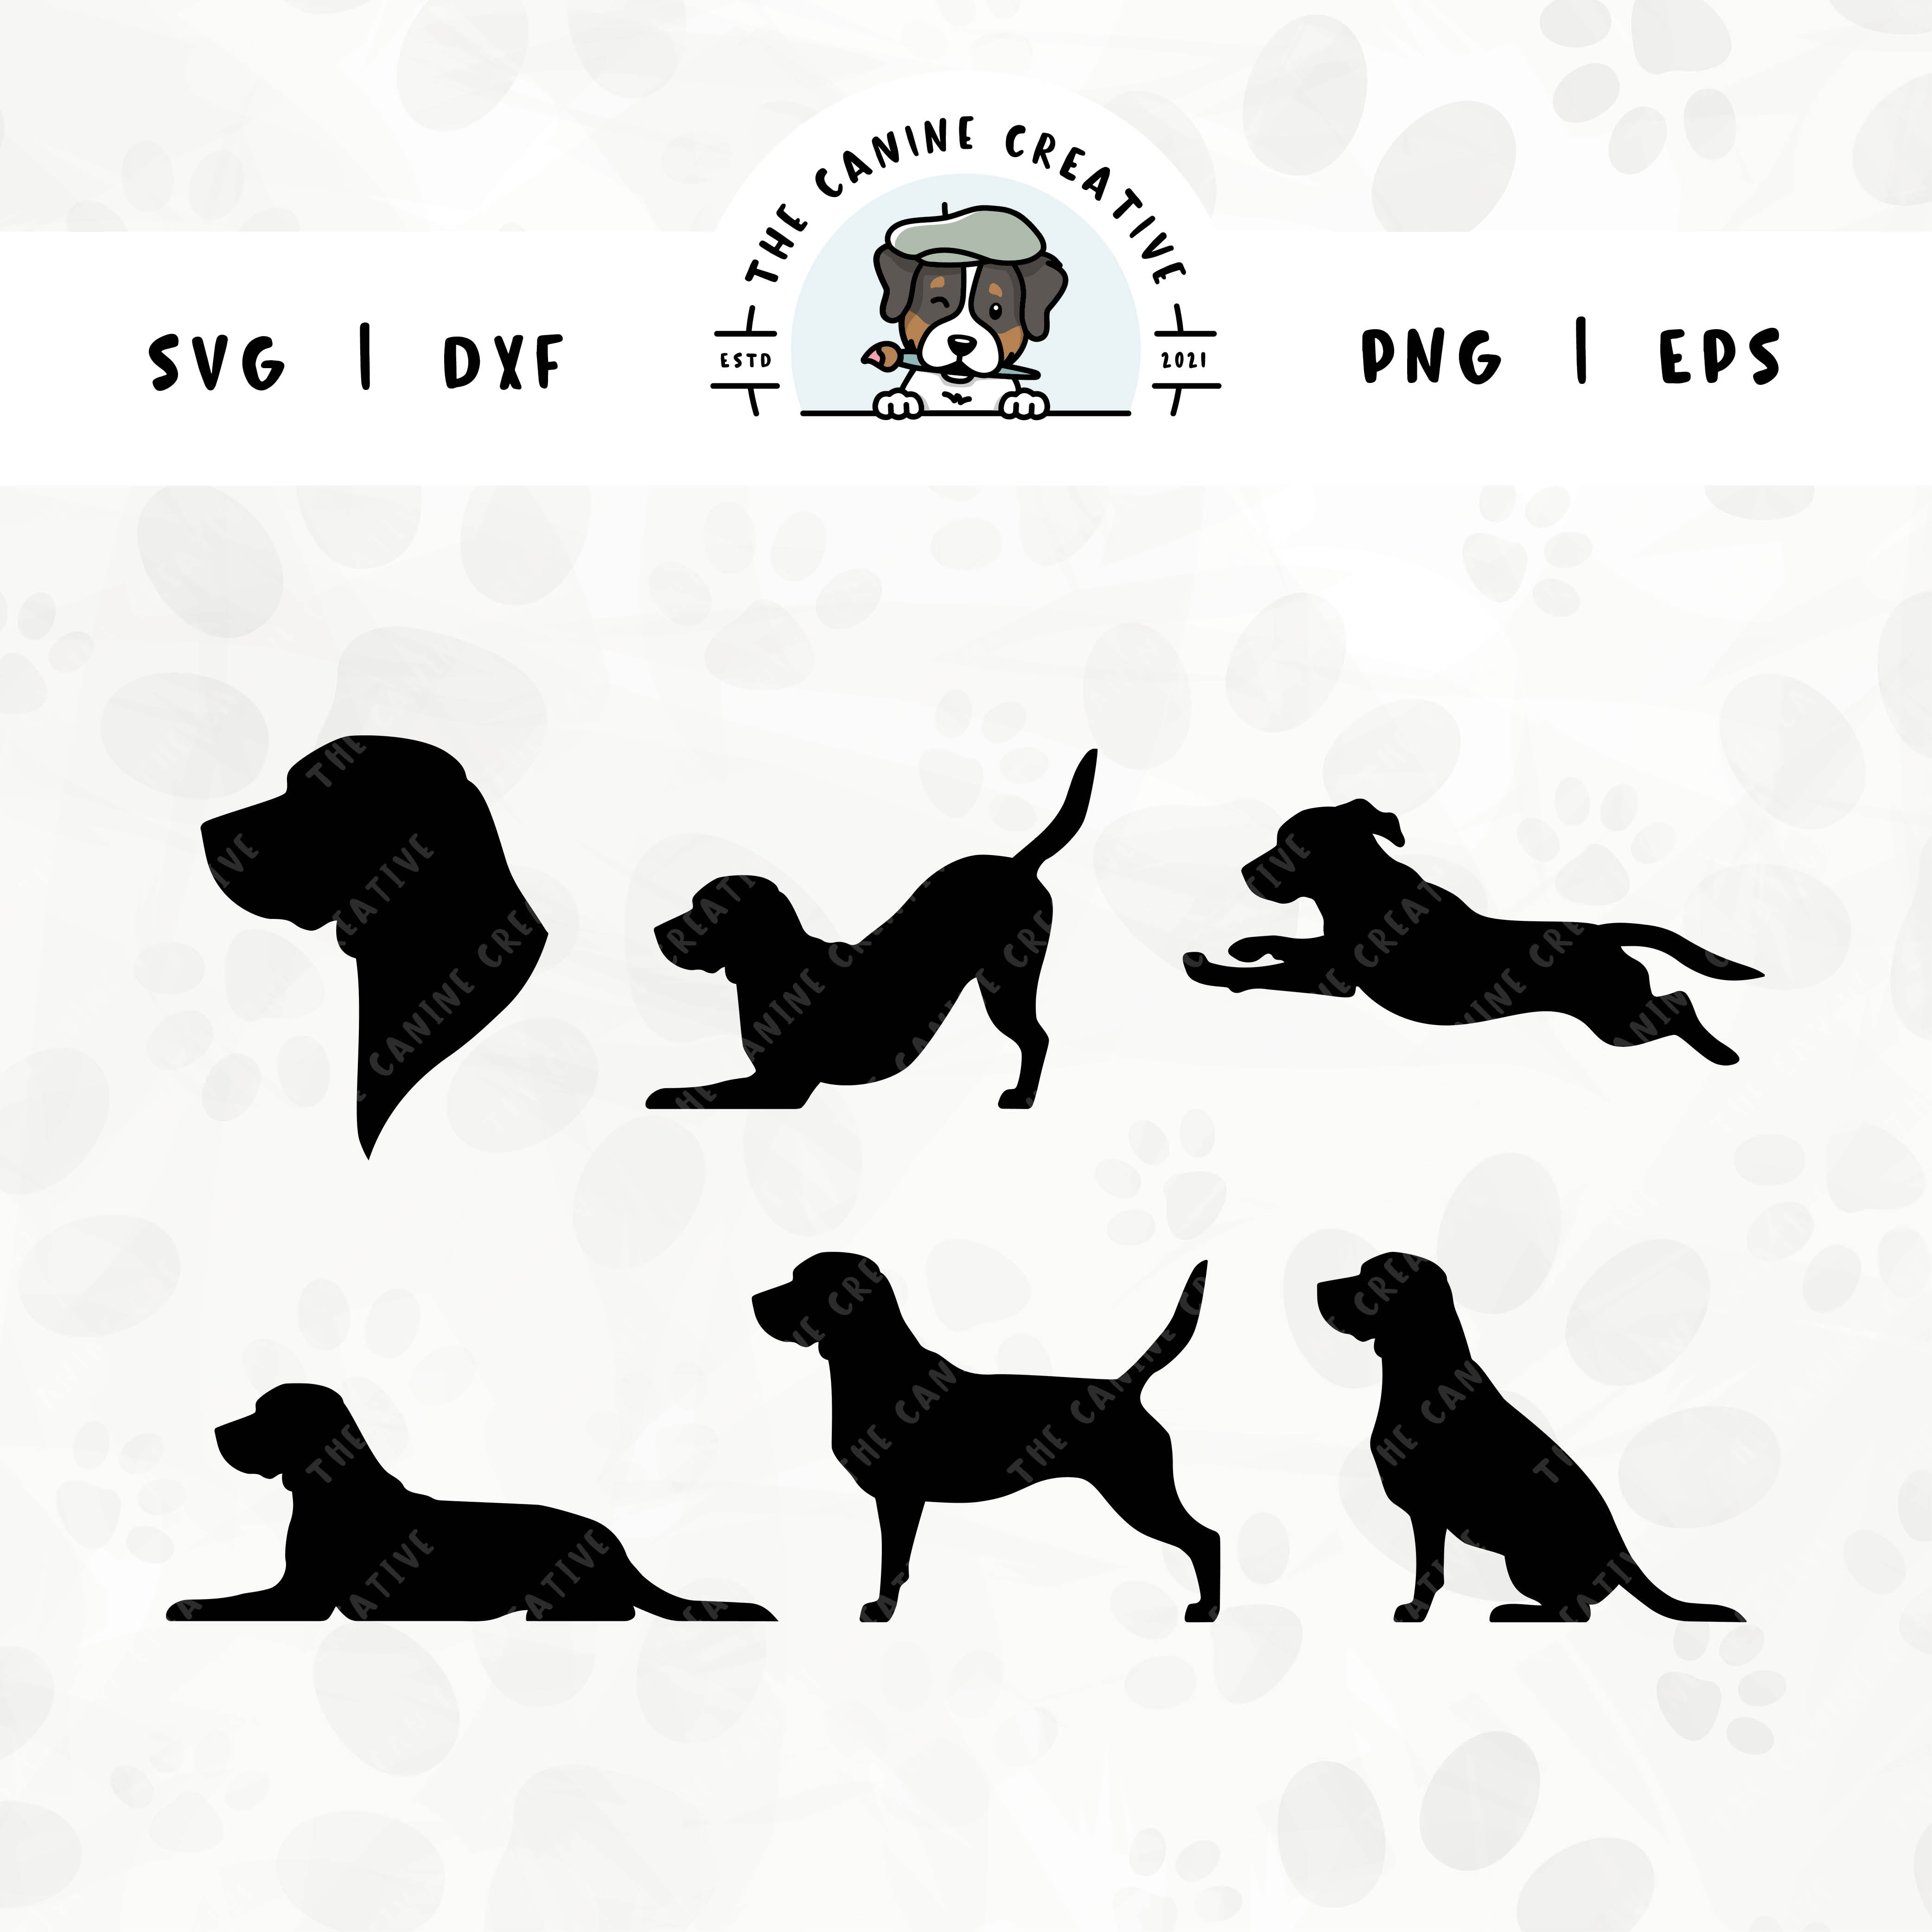 This 6-pack Beagle silhouette bundle (set 1) features a dog's head in profile, along with various poses including running, laying down, playing, standing, and sitting. File formats include: SVG, DXF, PNG, and EPS.